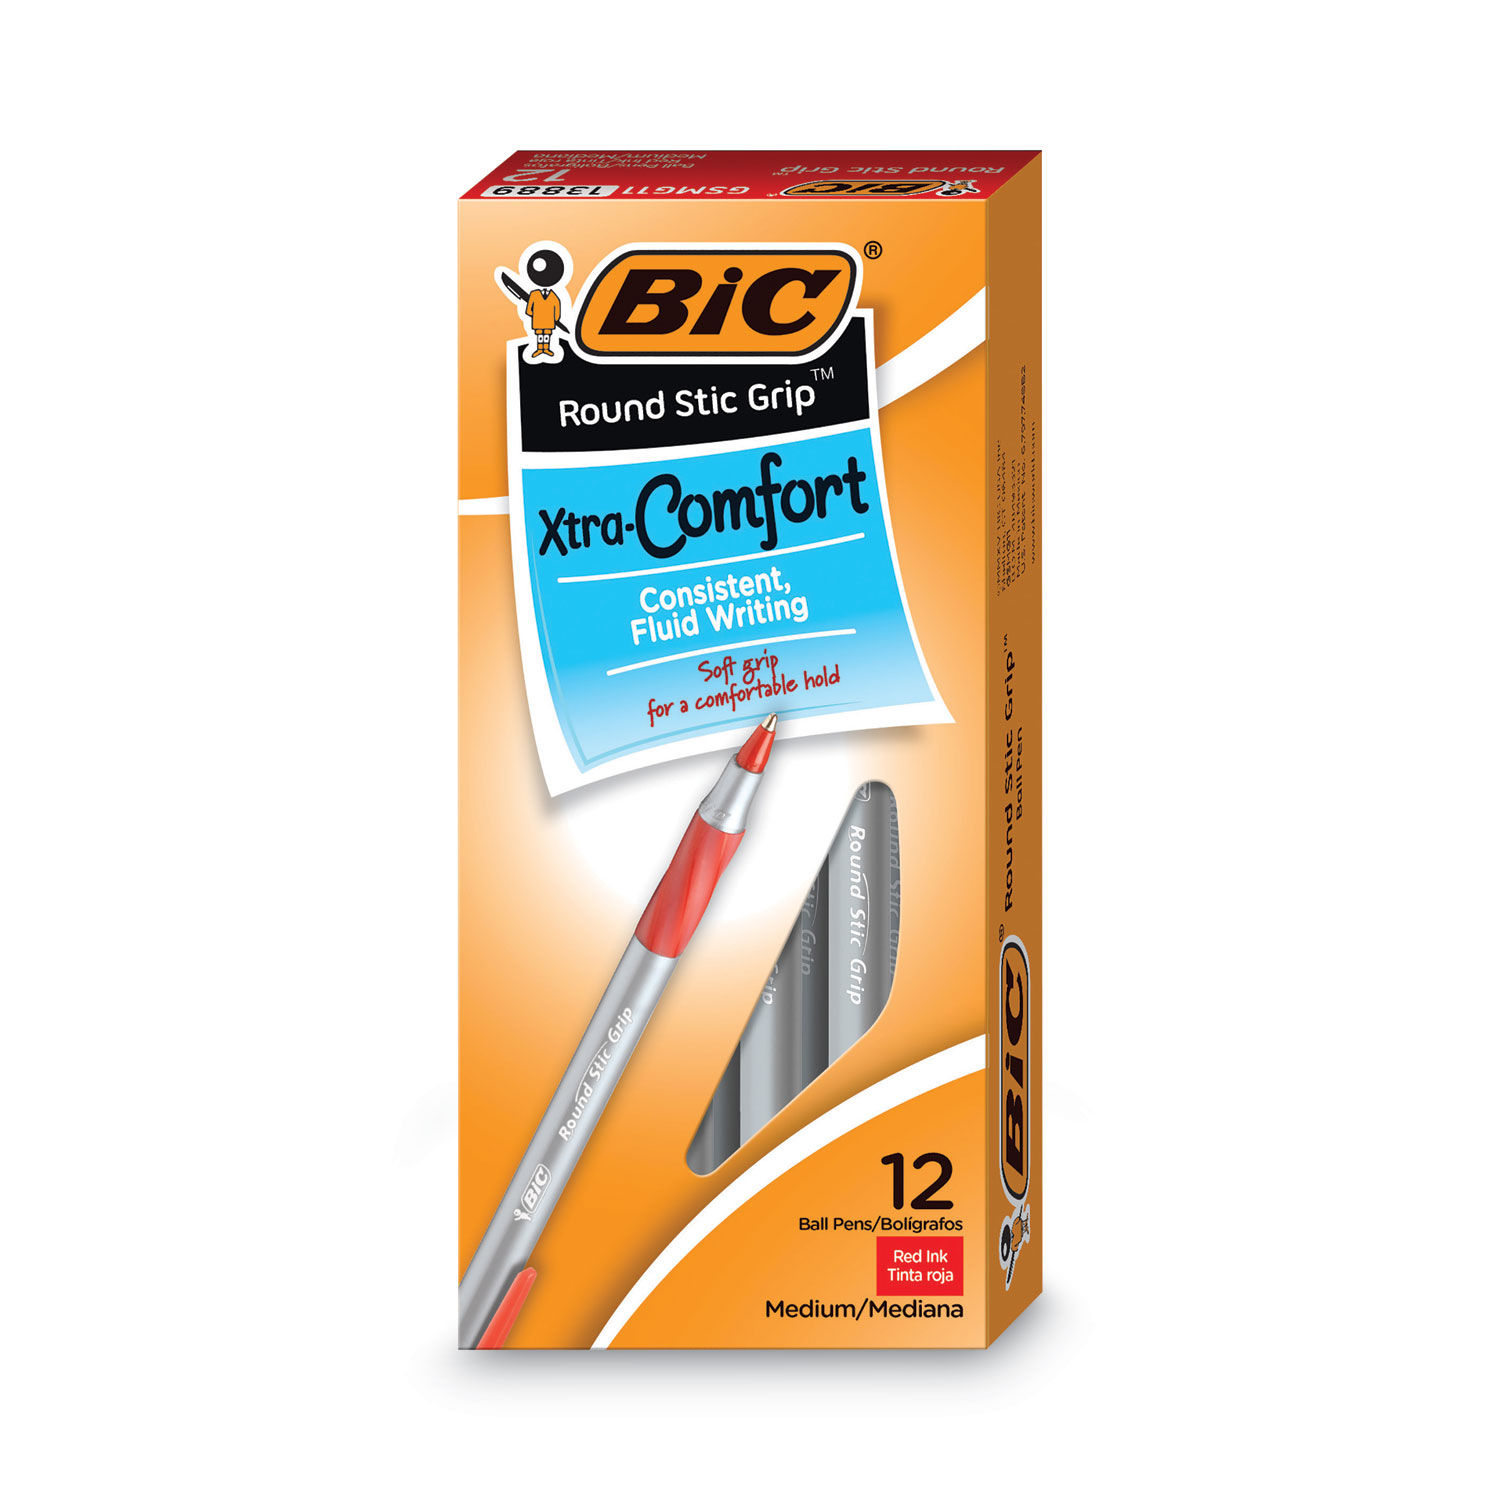 Round Stic Grip Xtra Comfort Ballpoint Pen by BICandreg; BICGSMG11RD